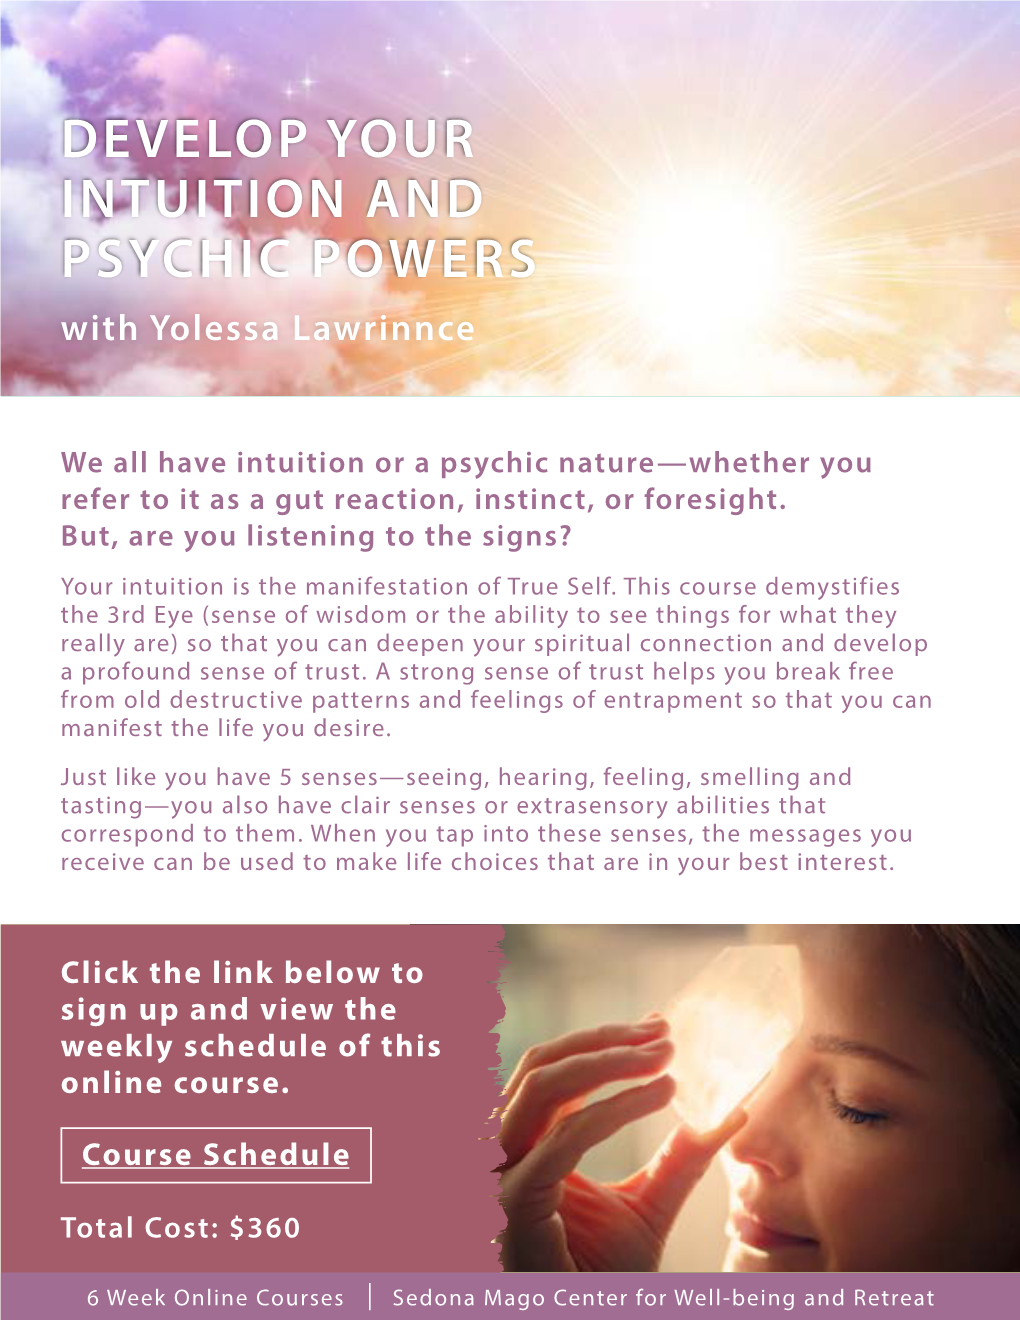 DEVELOP YOUR INTUITION and PSYCHIC POWERS with Yolessa Lawrinnce